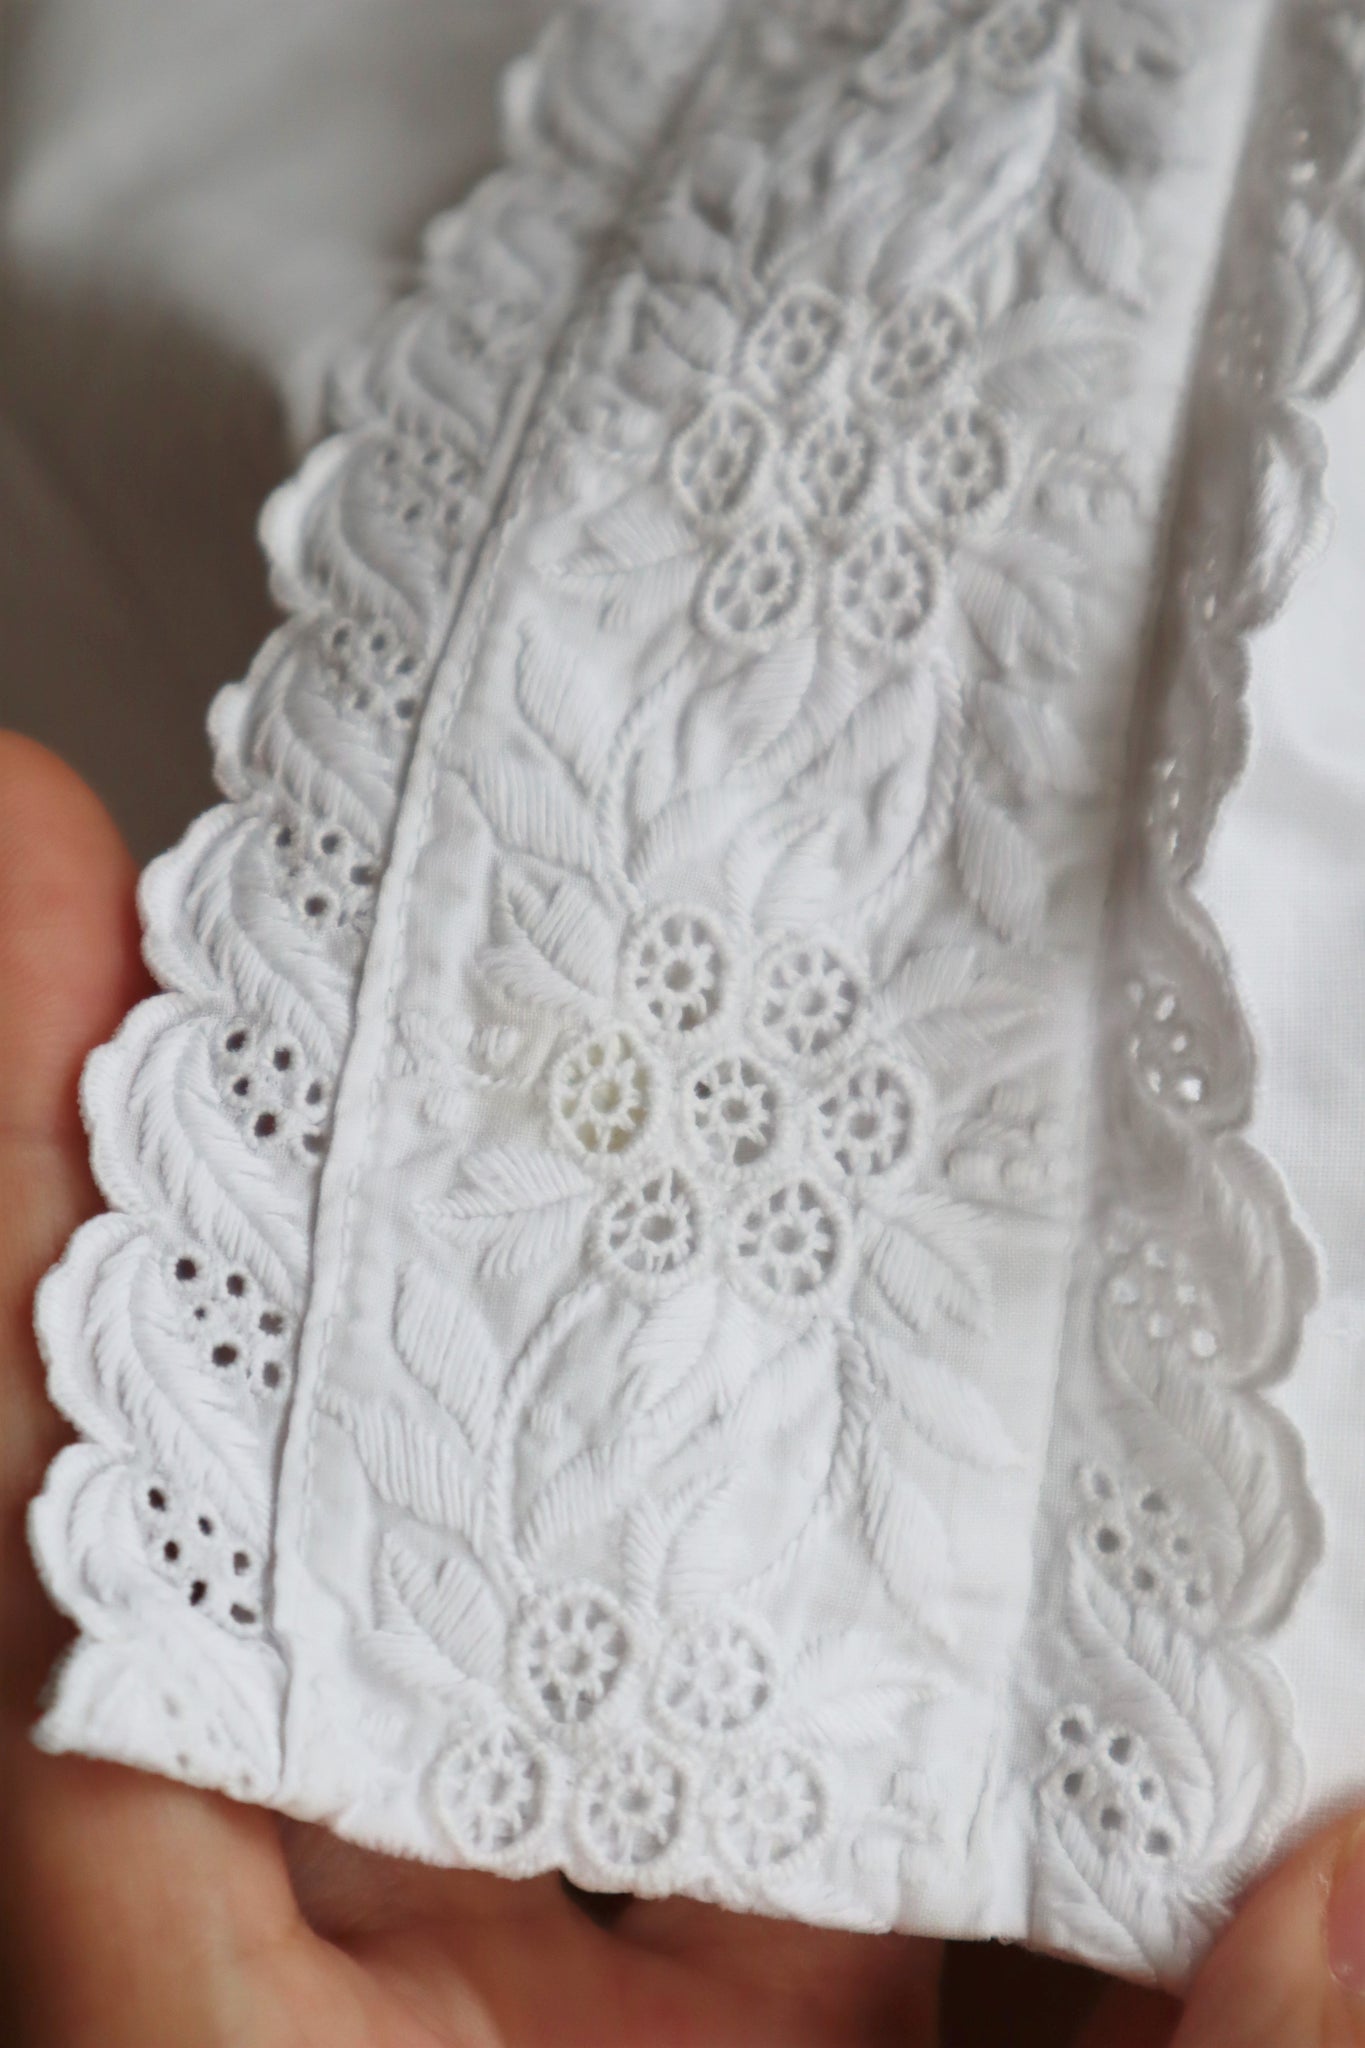 1900s Hand Embroidery Gather Design White Cotton Long Dress